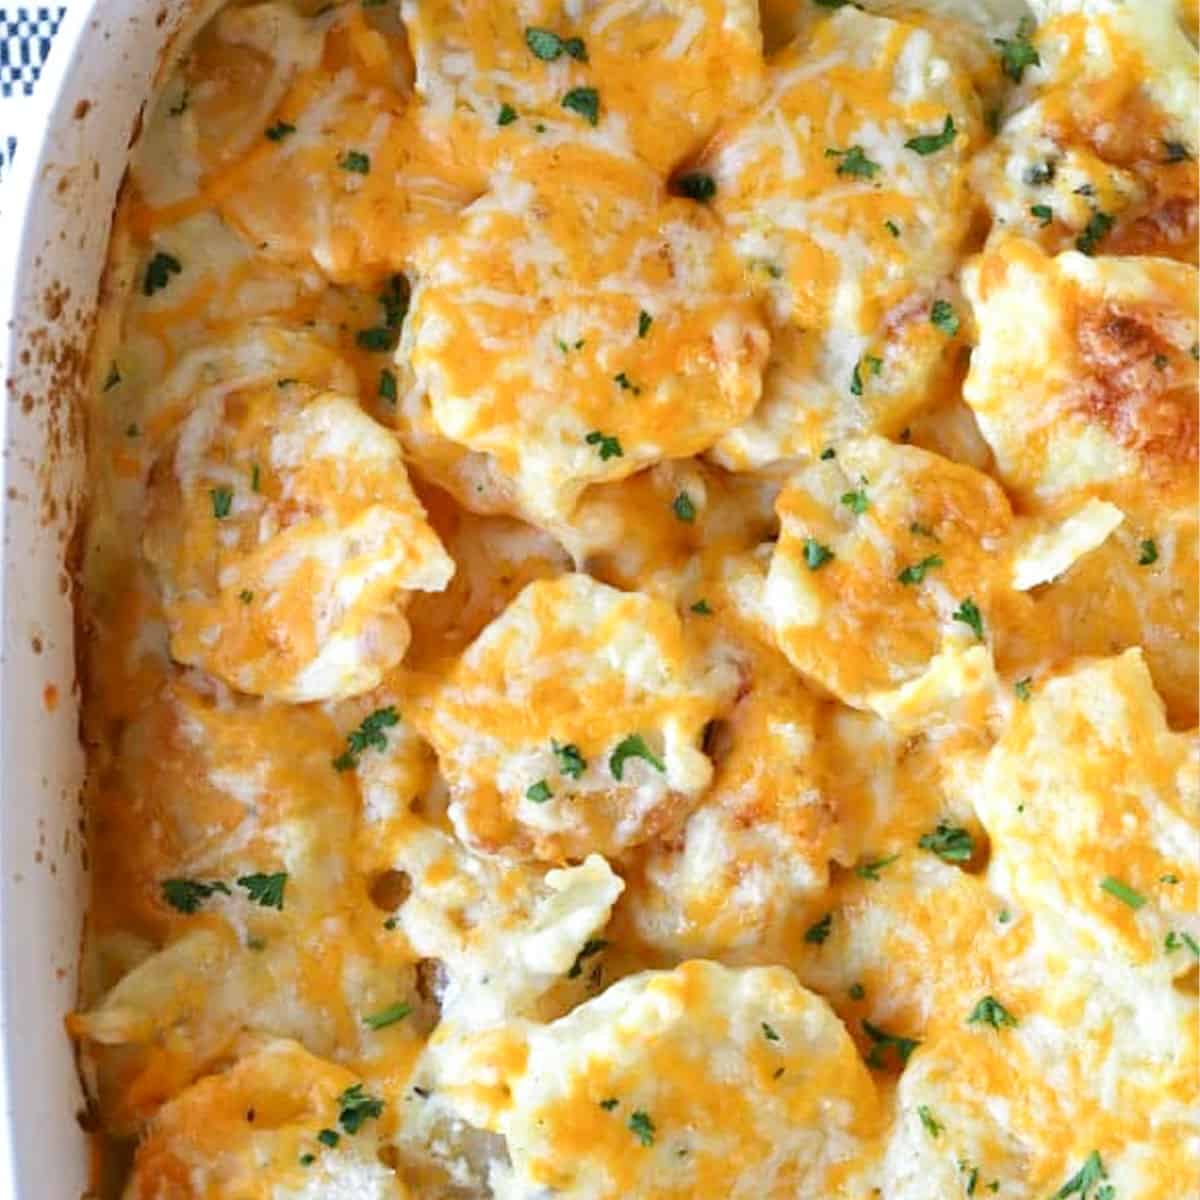 homemade scalloped potatoes in a white baking dish